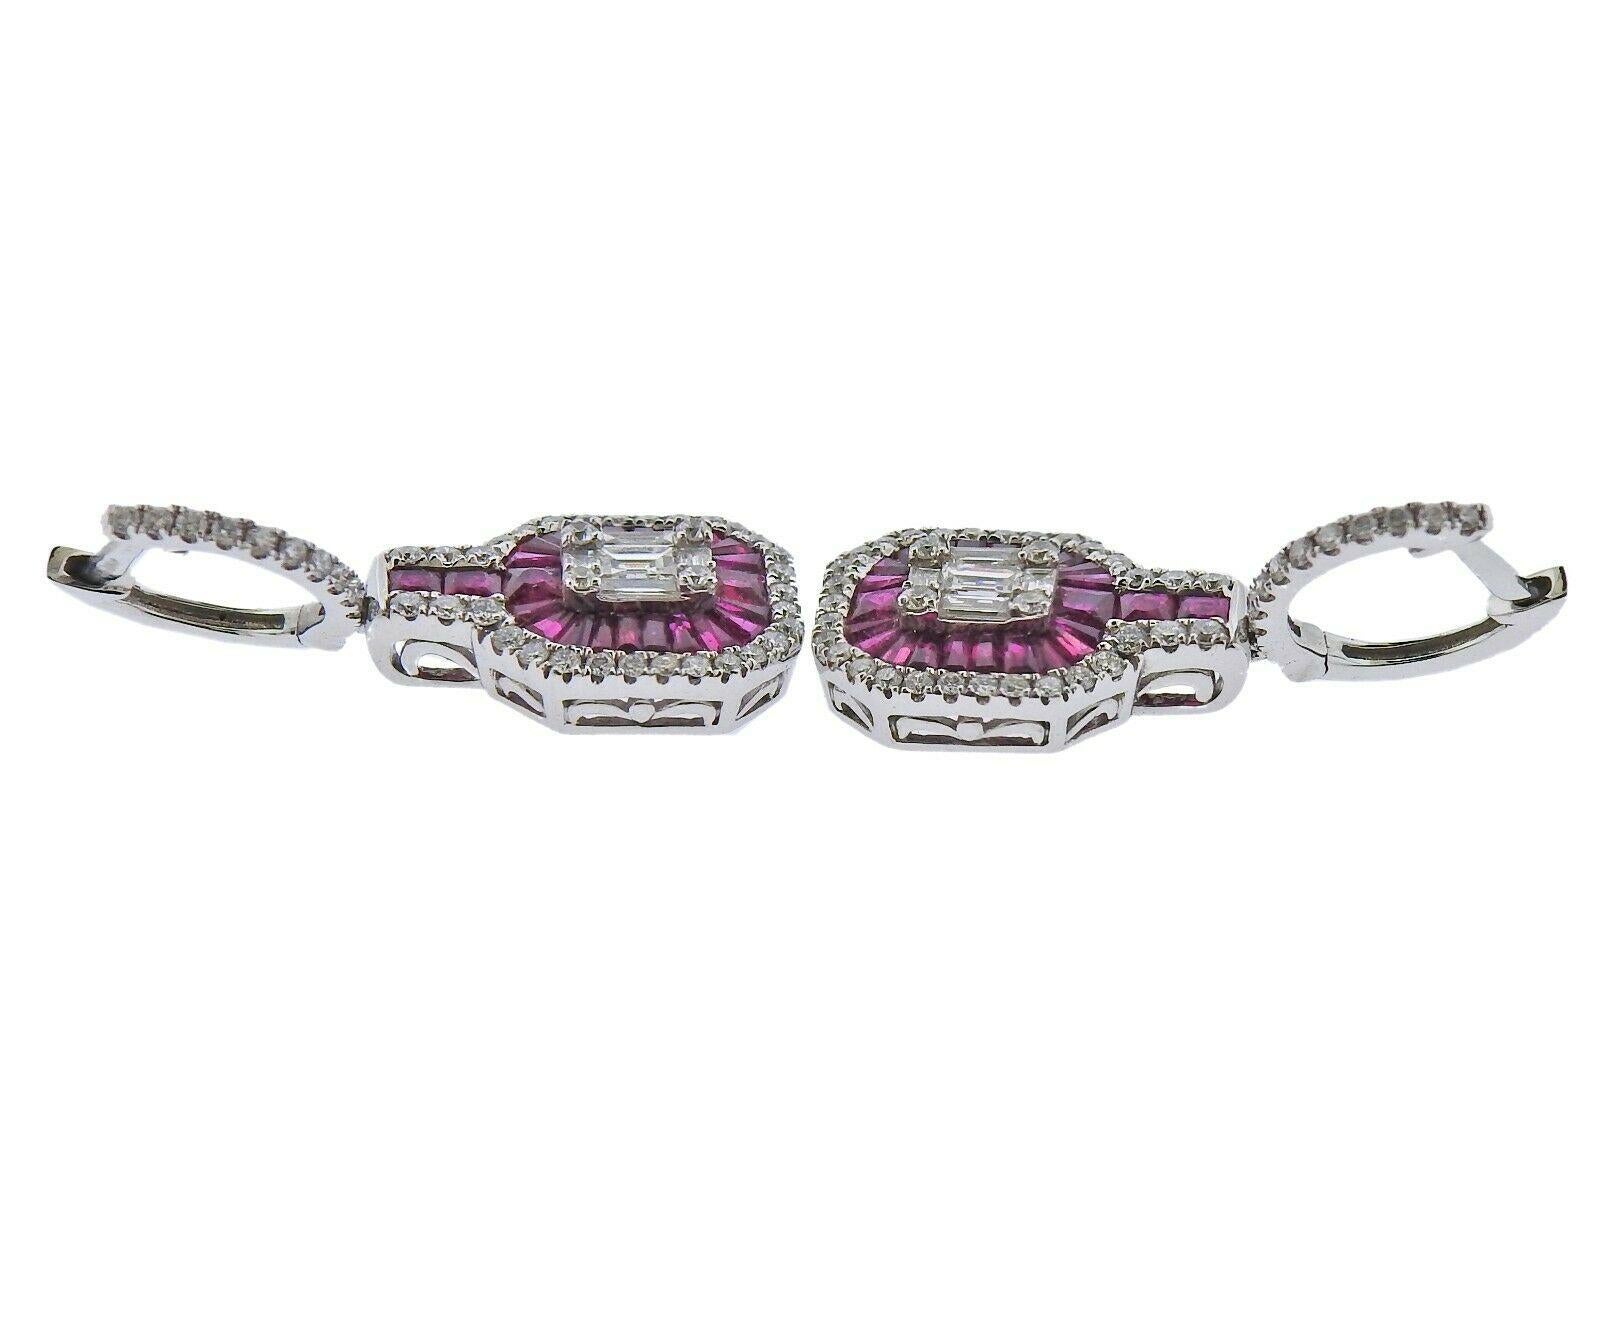 18k white gold earrings by Gregg Ruth. Set with 1.16ctw of VS-SI/GH diamonds, and 2.24ctw of rubies. Earrings are 30mm x 12mm. Marked - Gregg Ruth, 18k, D1.16, R2.24. Weight -7.2 grams. Retail $8350
